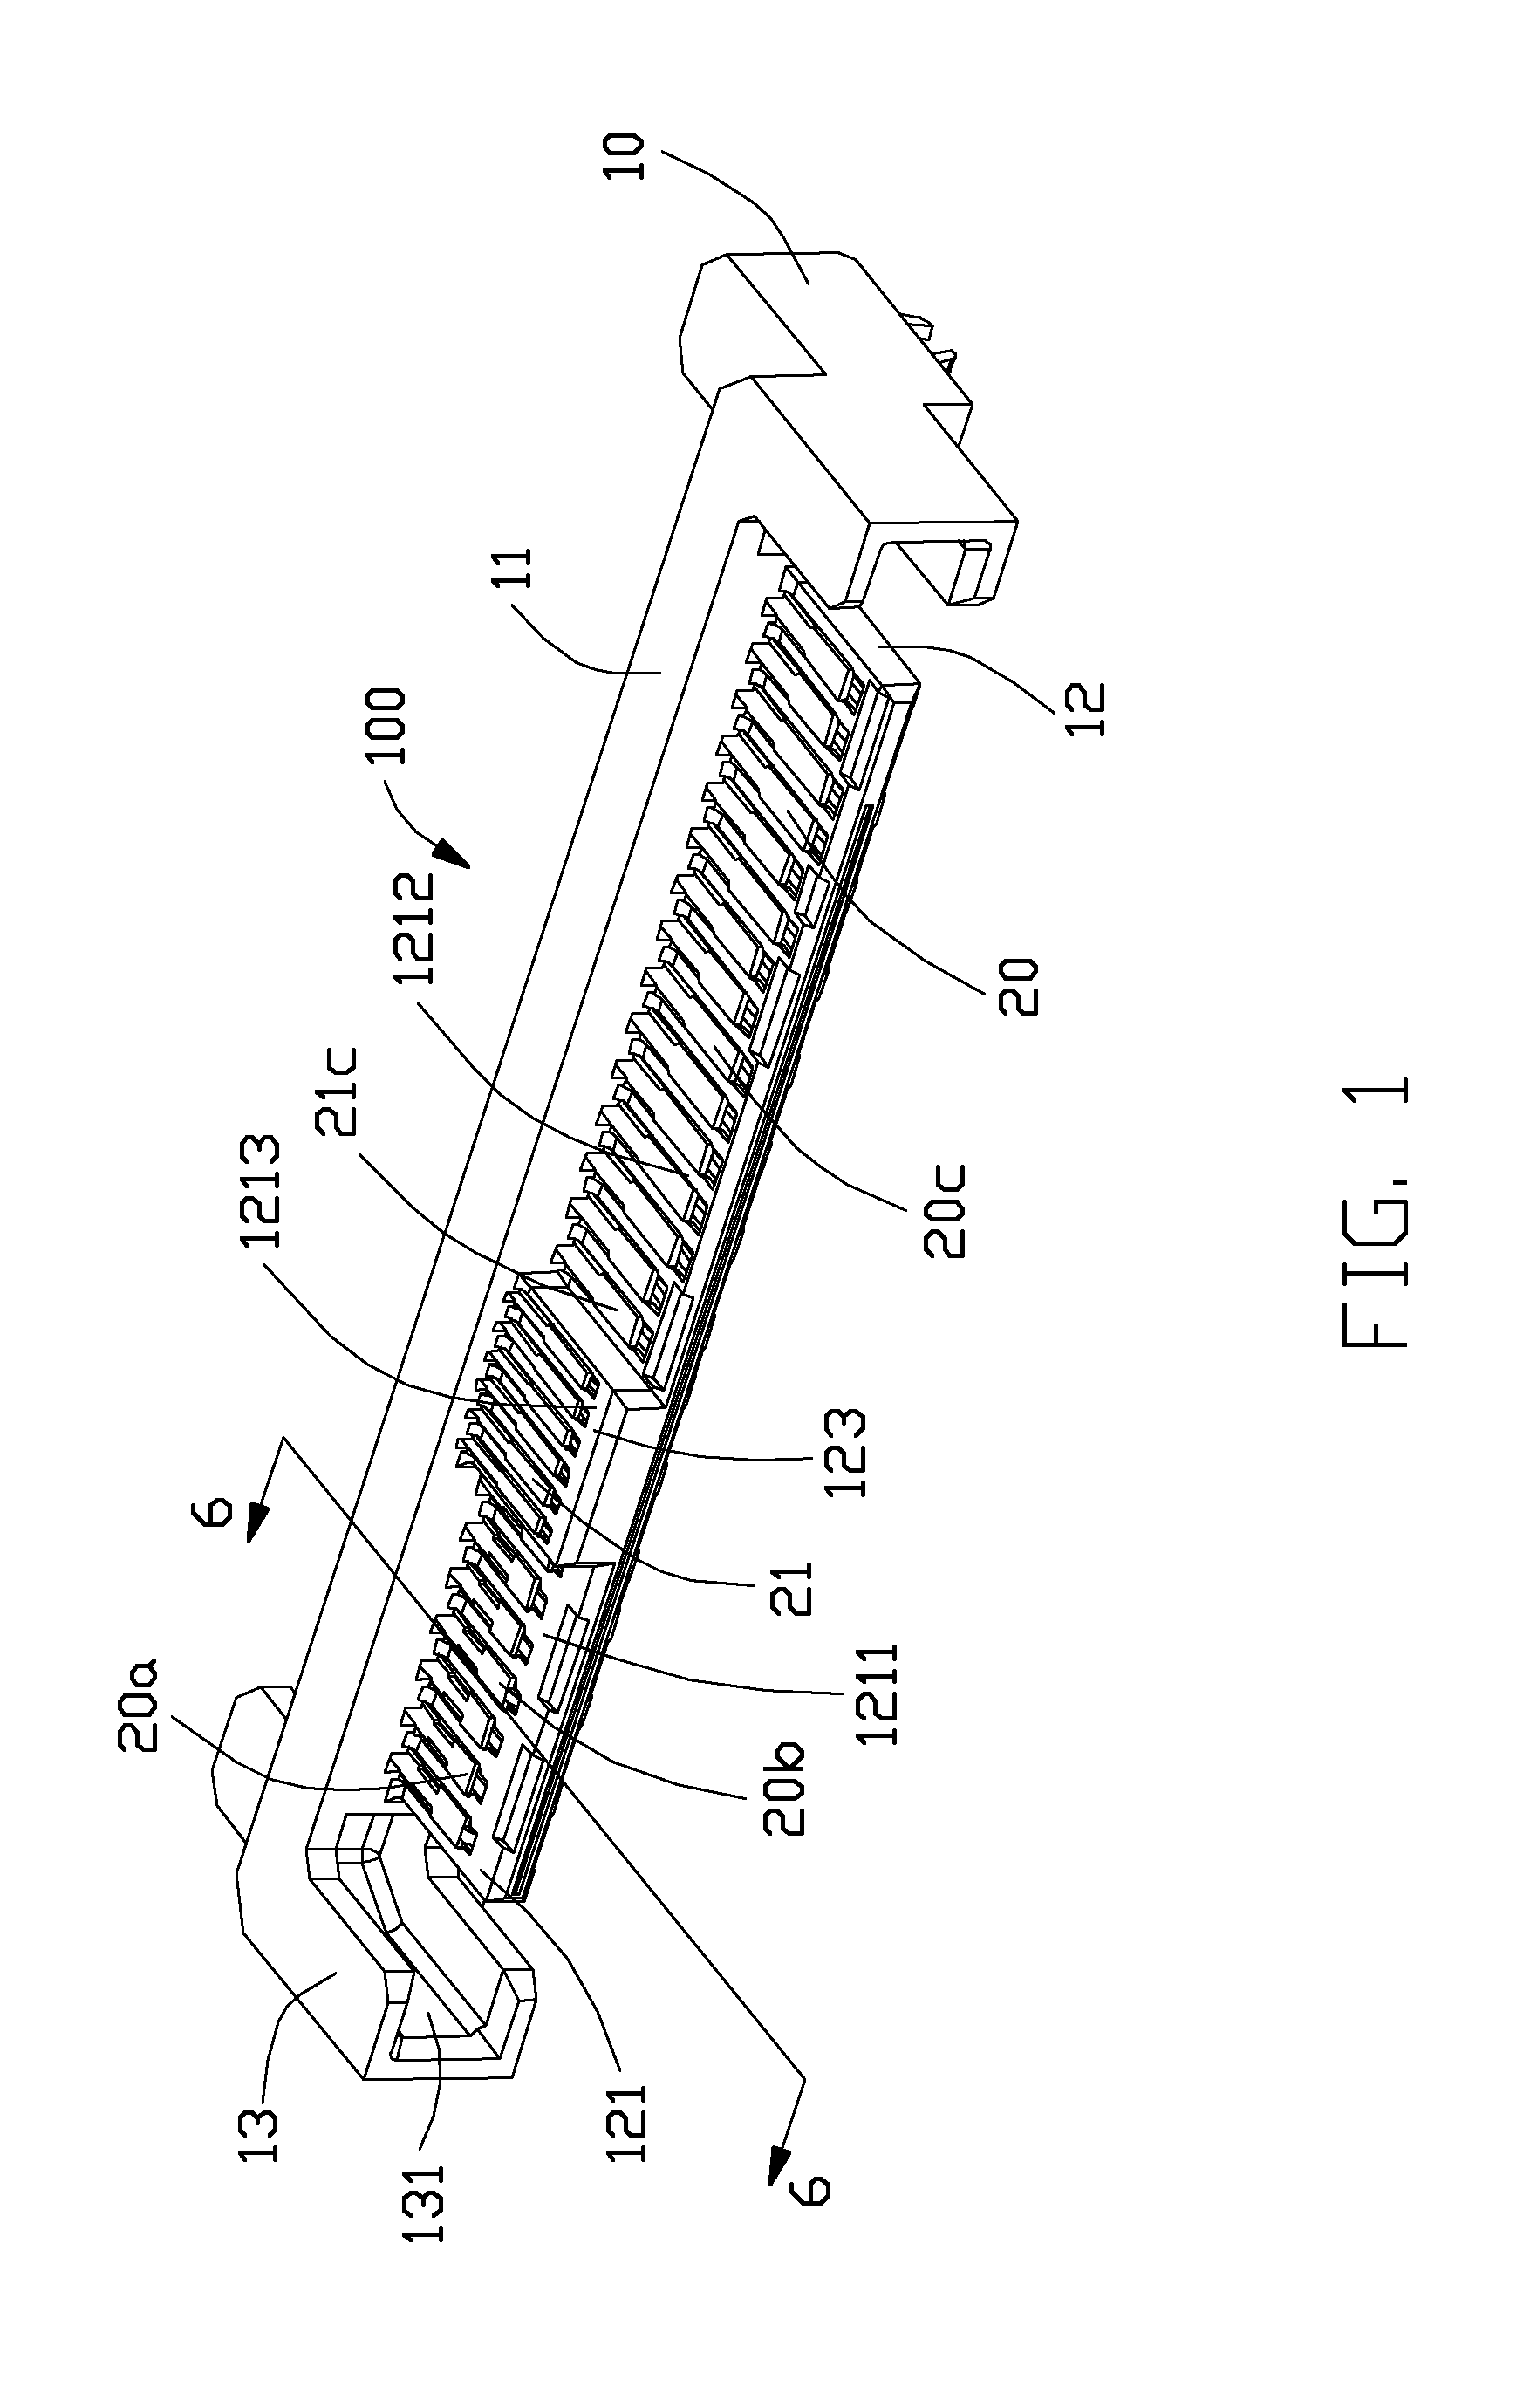 Electrical connector with imprived grounding bar